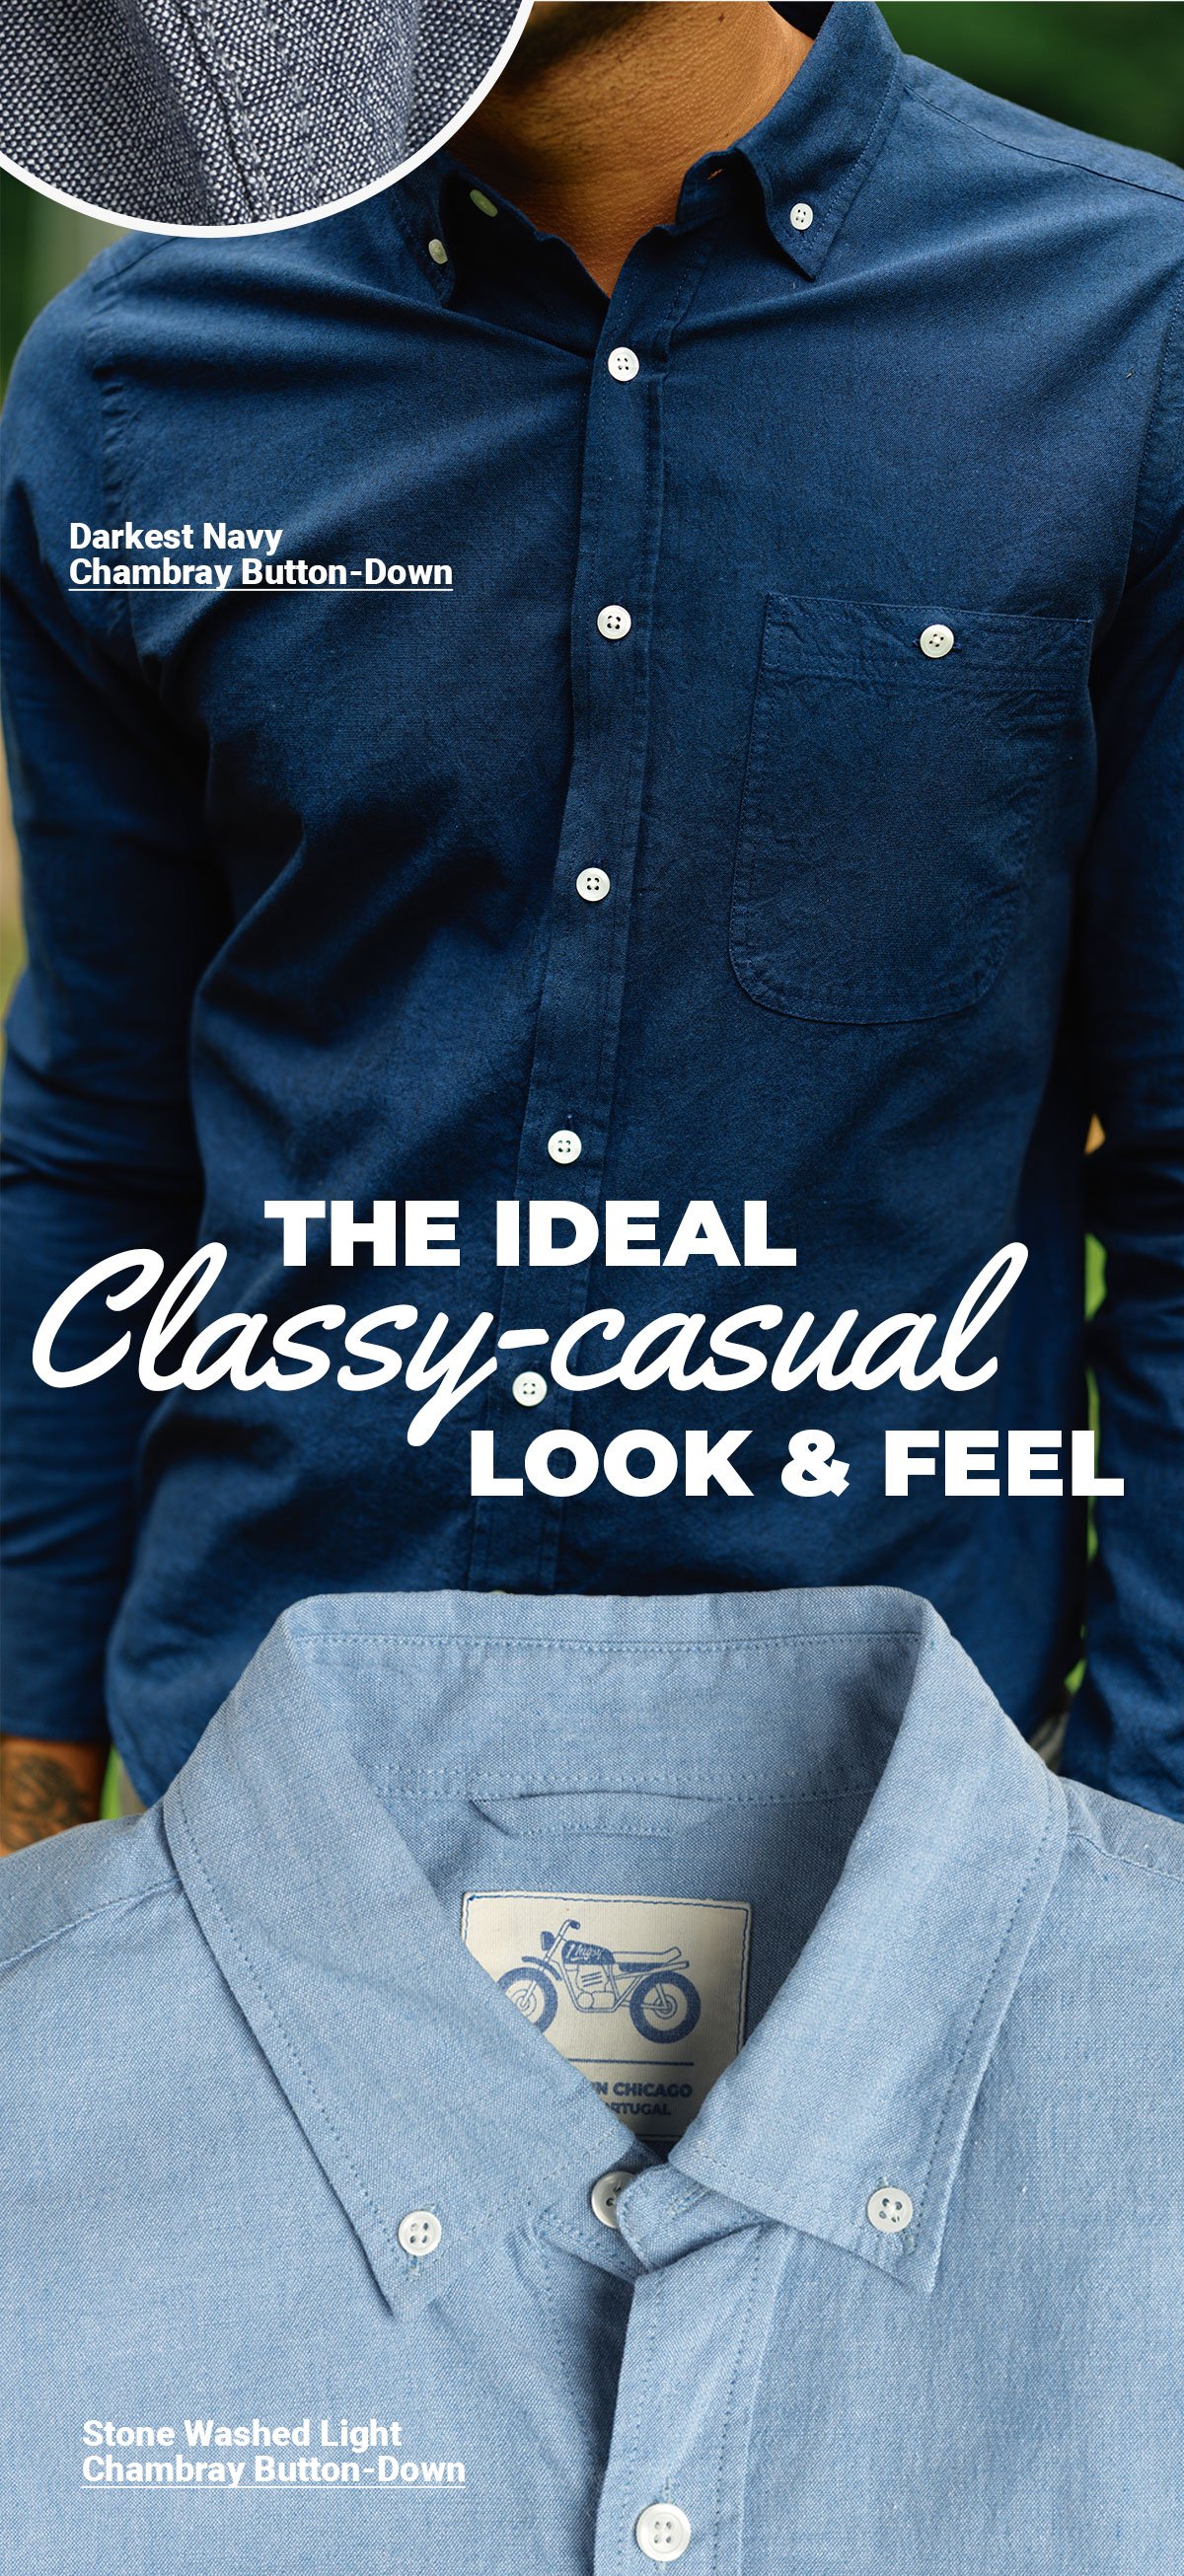 Darkest navy chambray button-down. The ideal classy-casual look & feel. Model is wearing navy chambray. A flay-lay of Stone Washed Light Chambray button down.